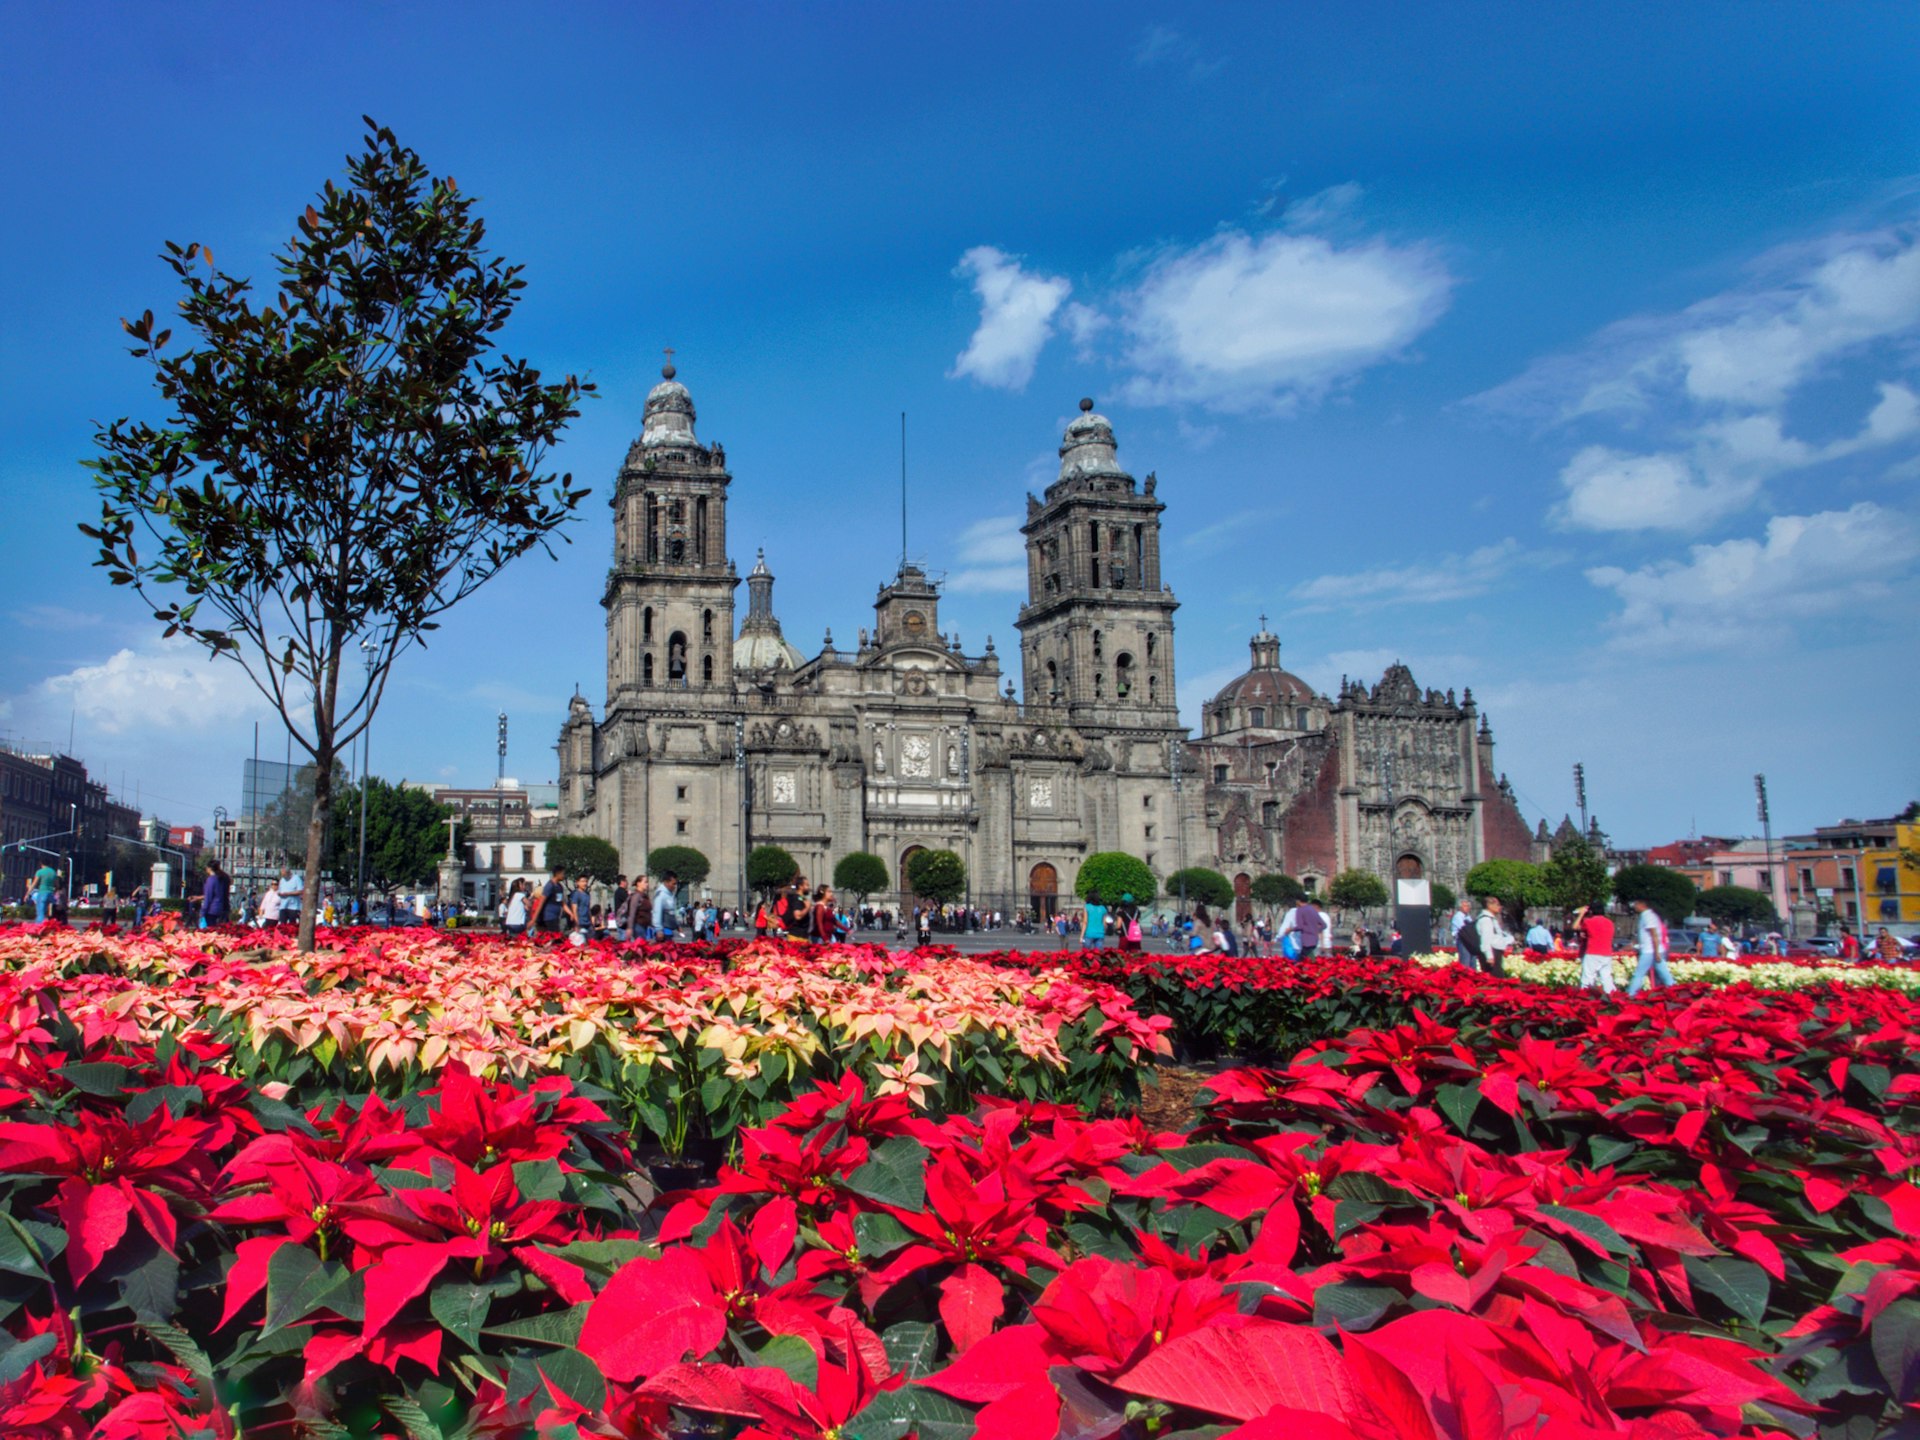 Christmas time in Mexico City with colorful poinsettias stood outside the city's major church